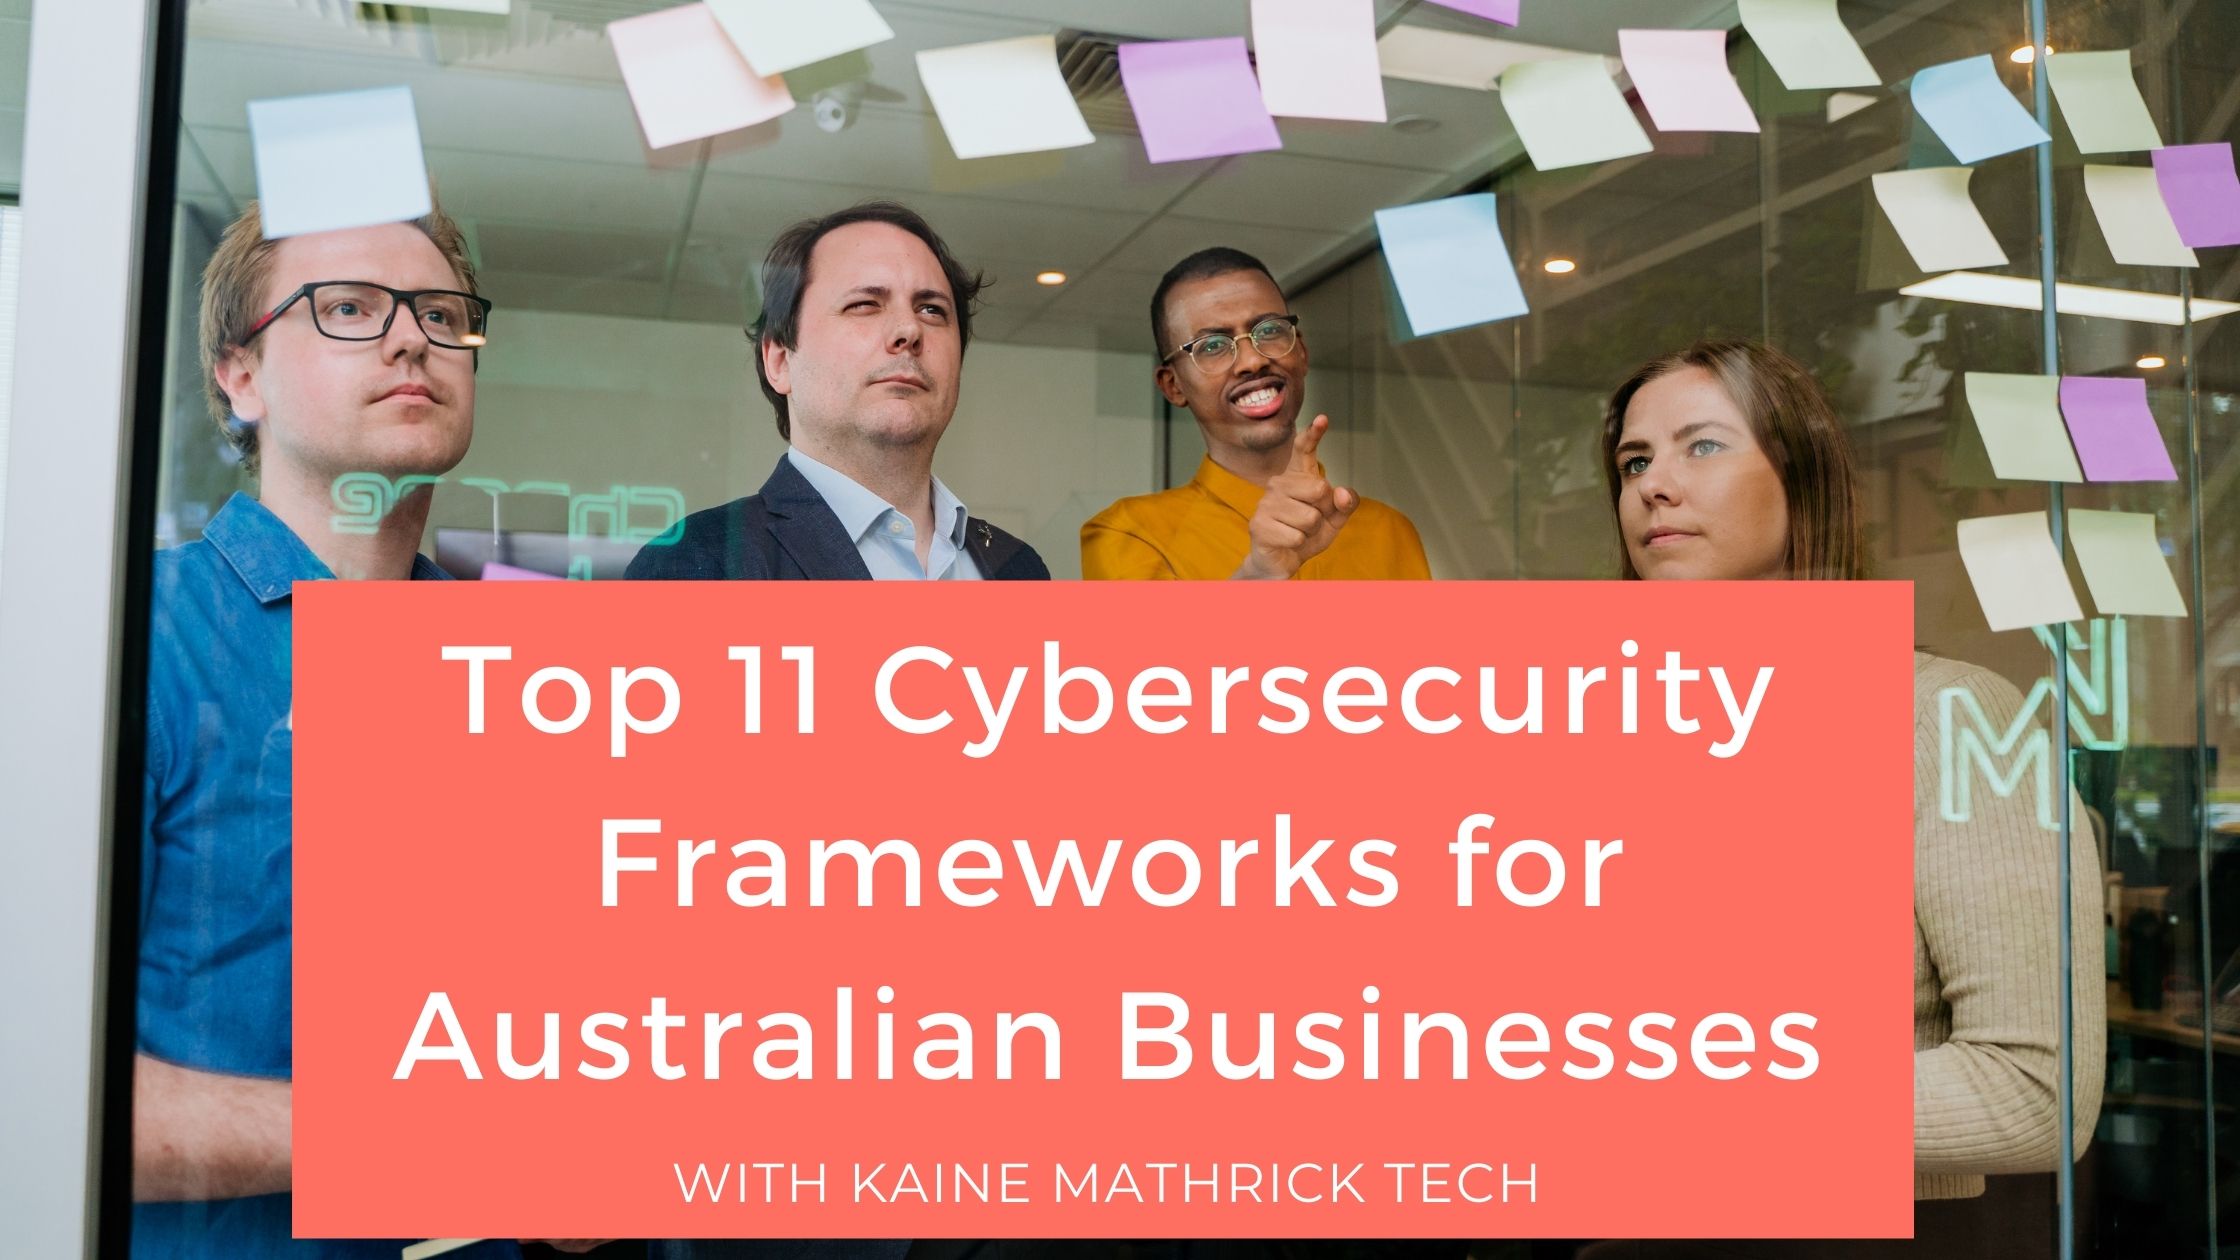 Top 11 Cybersecurity Frameworks for Australian Businesses in 2022